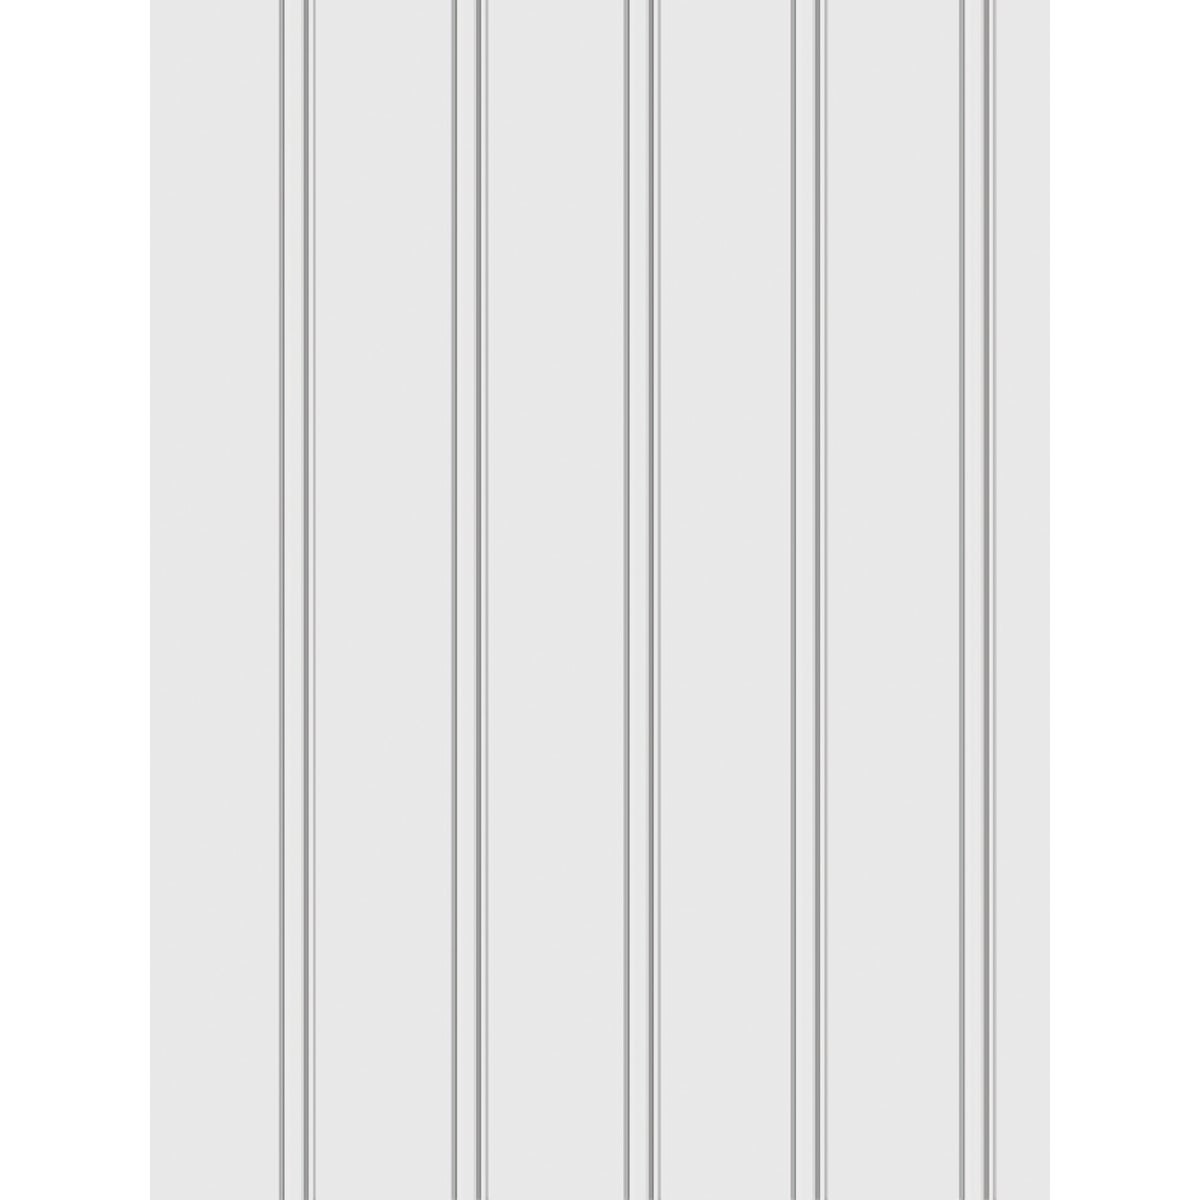 Item 105457, Classic bead board wall paneling ideal for use in many areas.